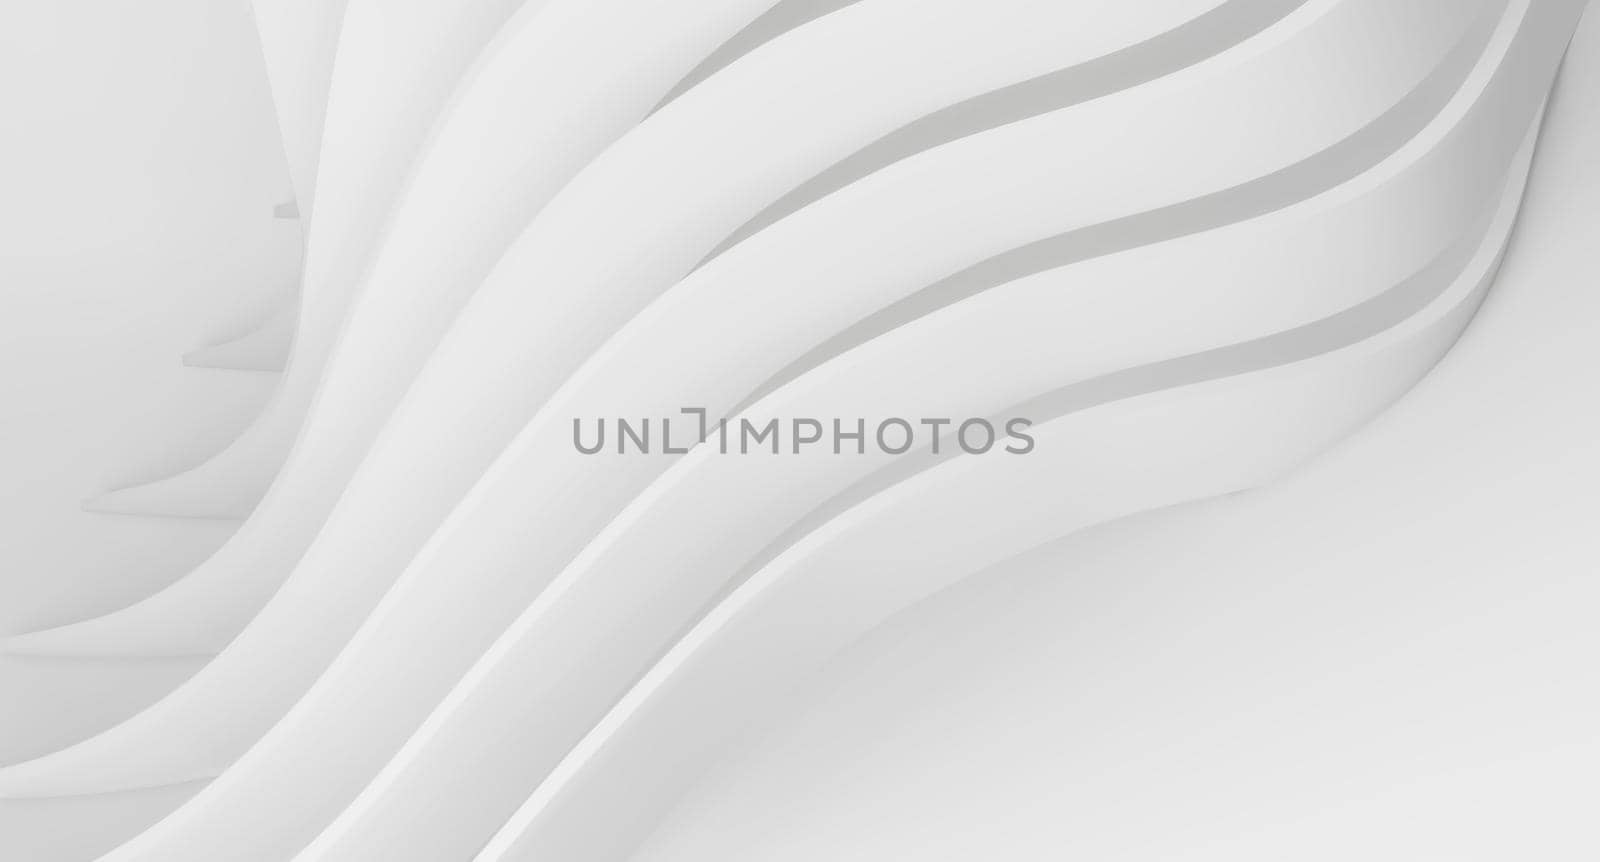 Abstract white Architecture Background.  3d render. Modern Geometric Wallpaper. Futuristic Technology Design